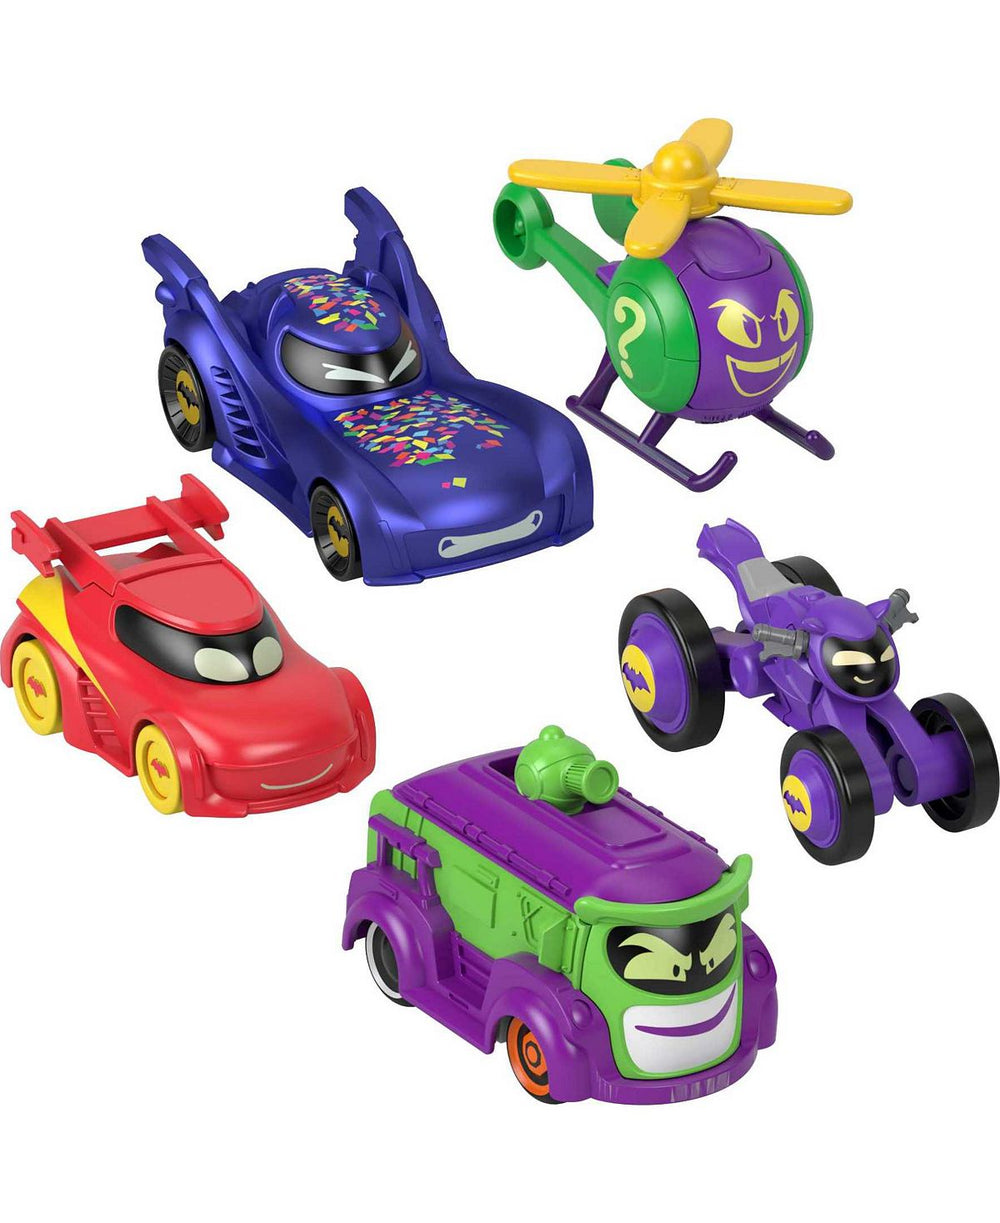 Fisher-Price DC BatWheels Diecast Vehicle Set, 1:55 Scale, 5-Pack